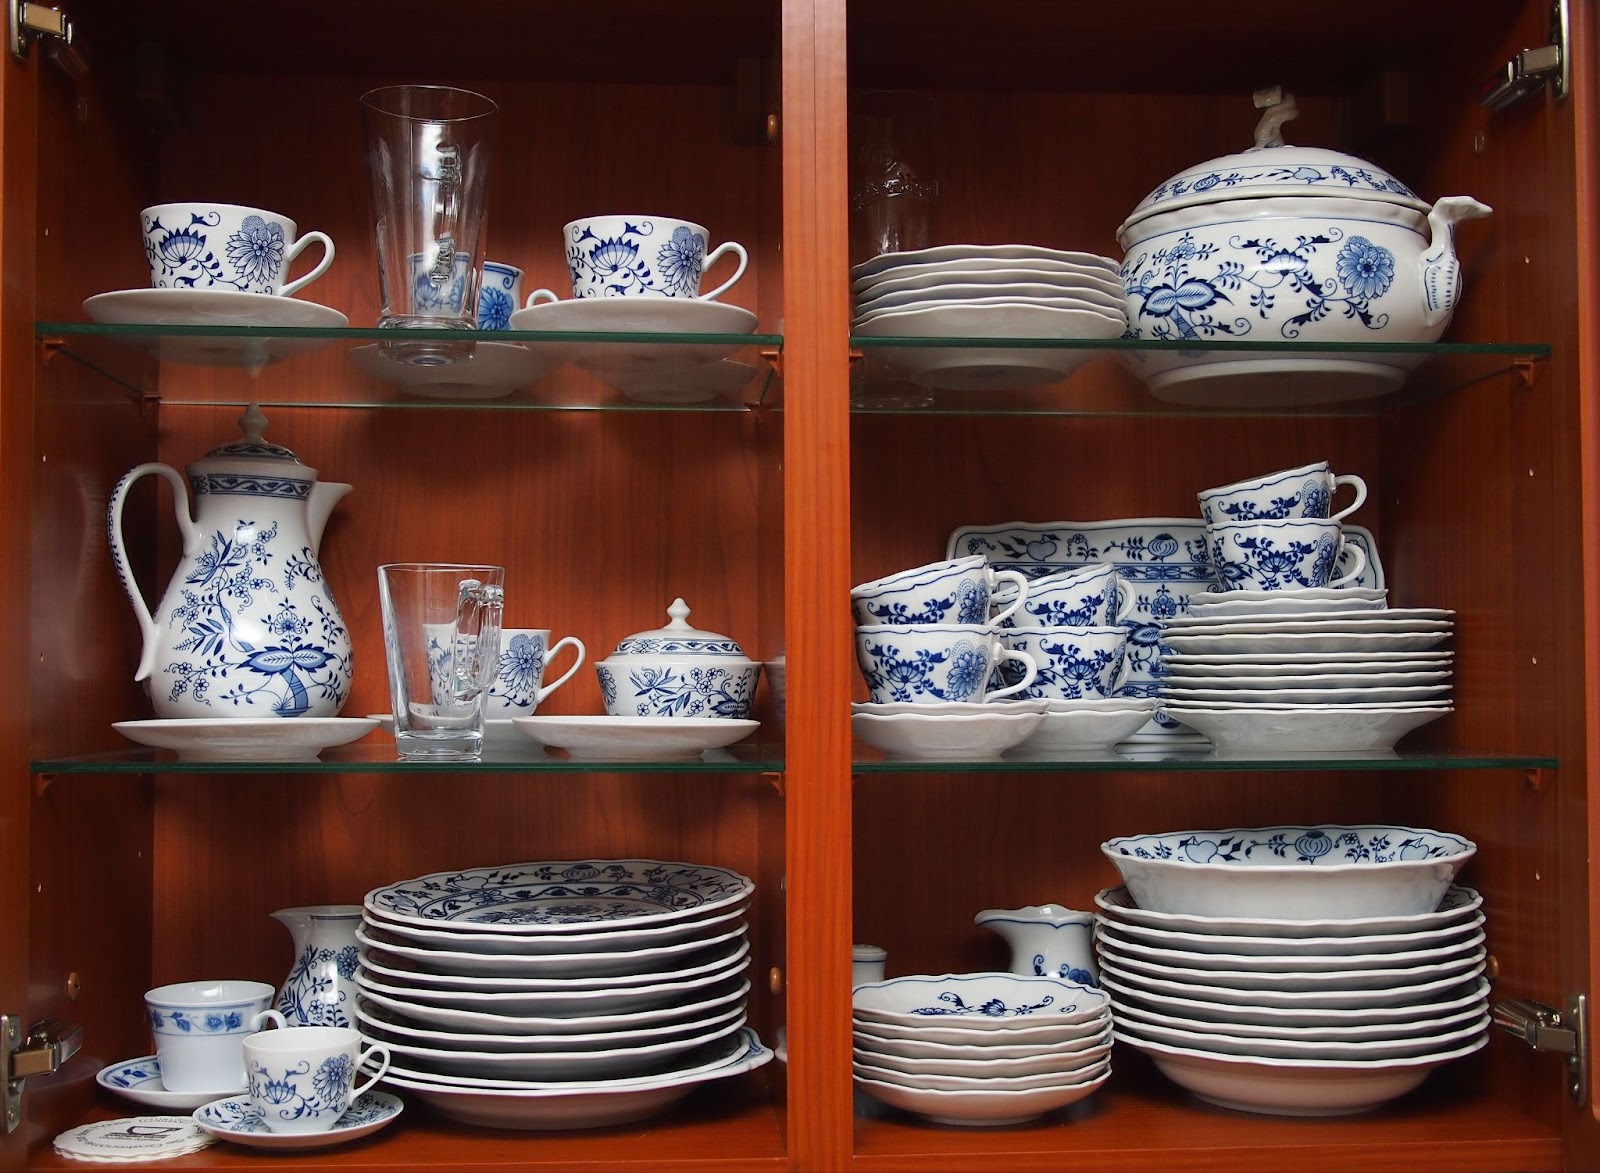 cabinet filled with blue and white china showing wedding registry tips for what you don't need